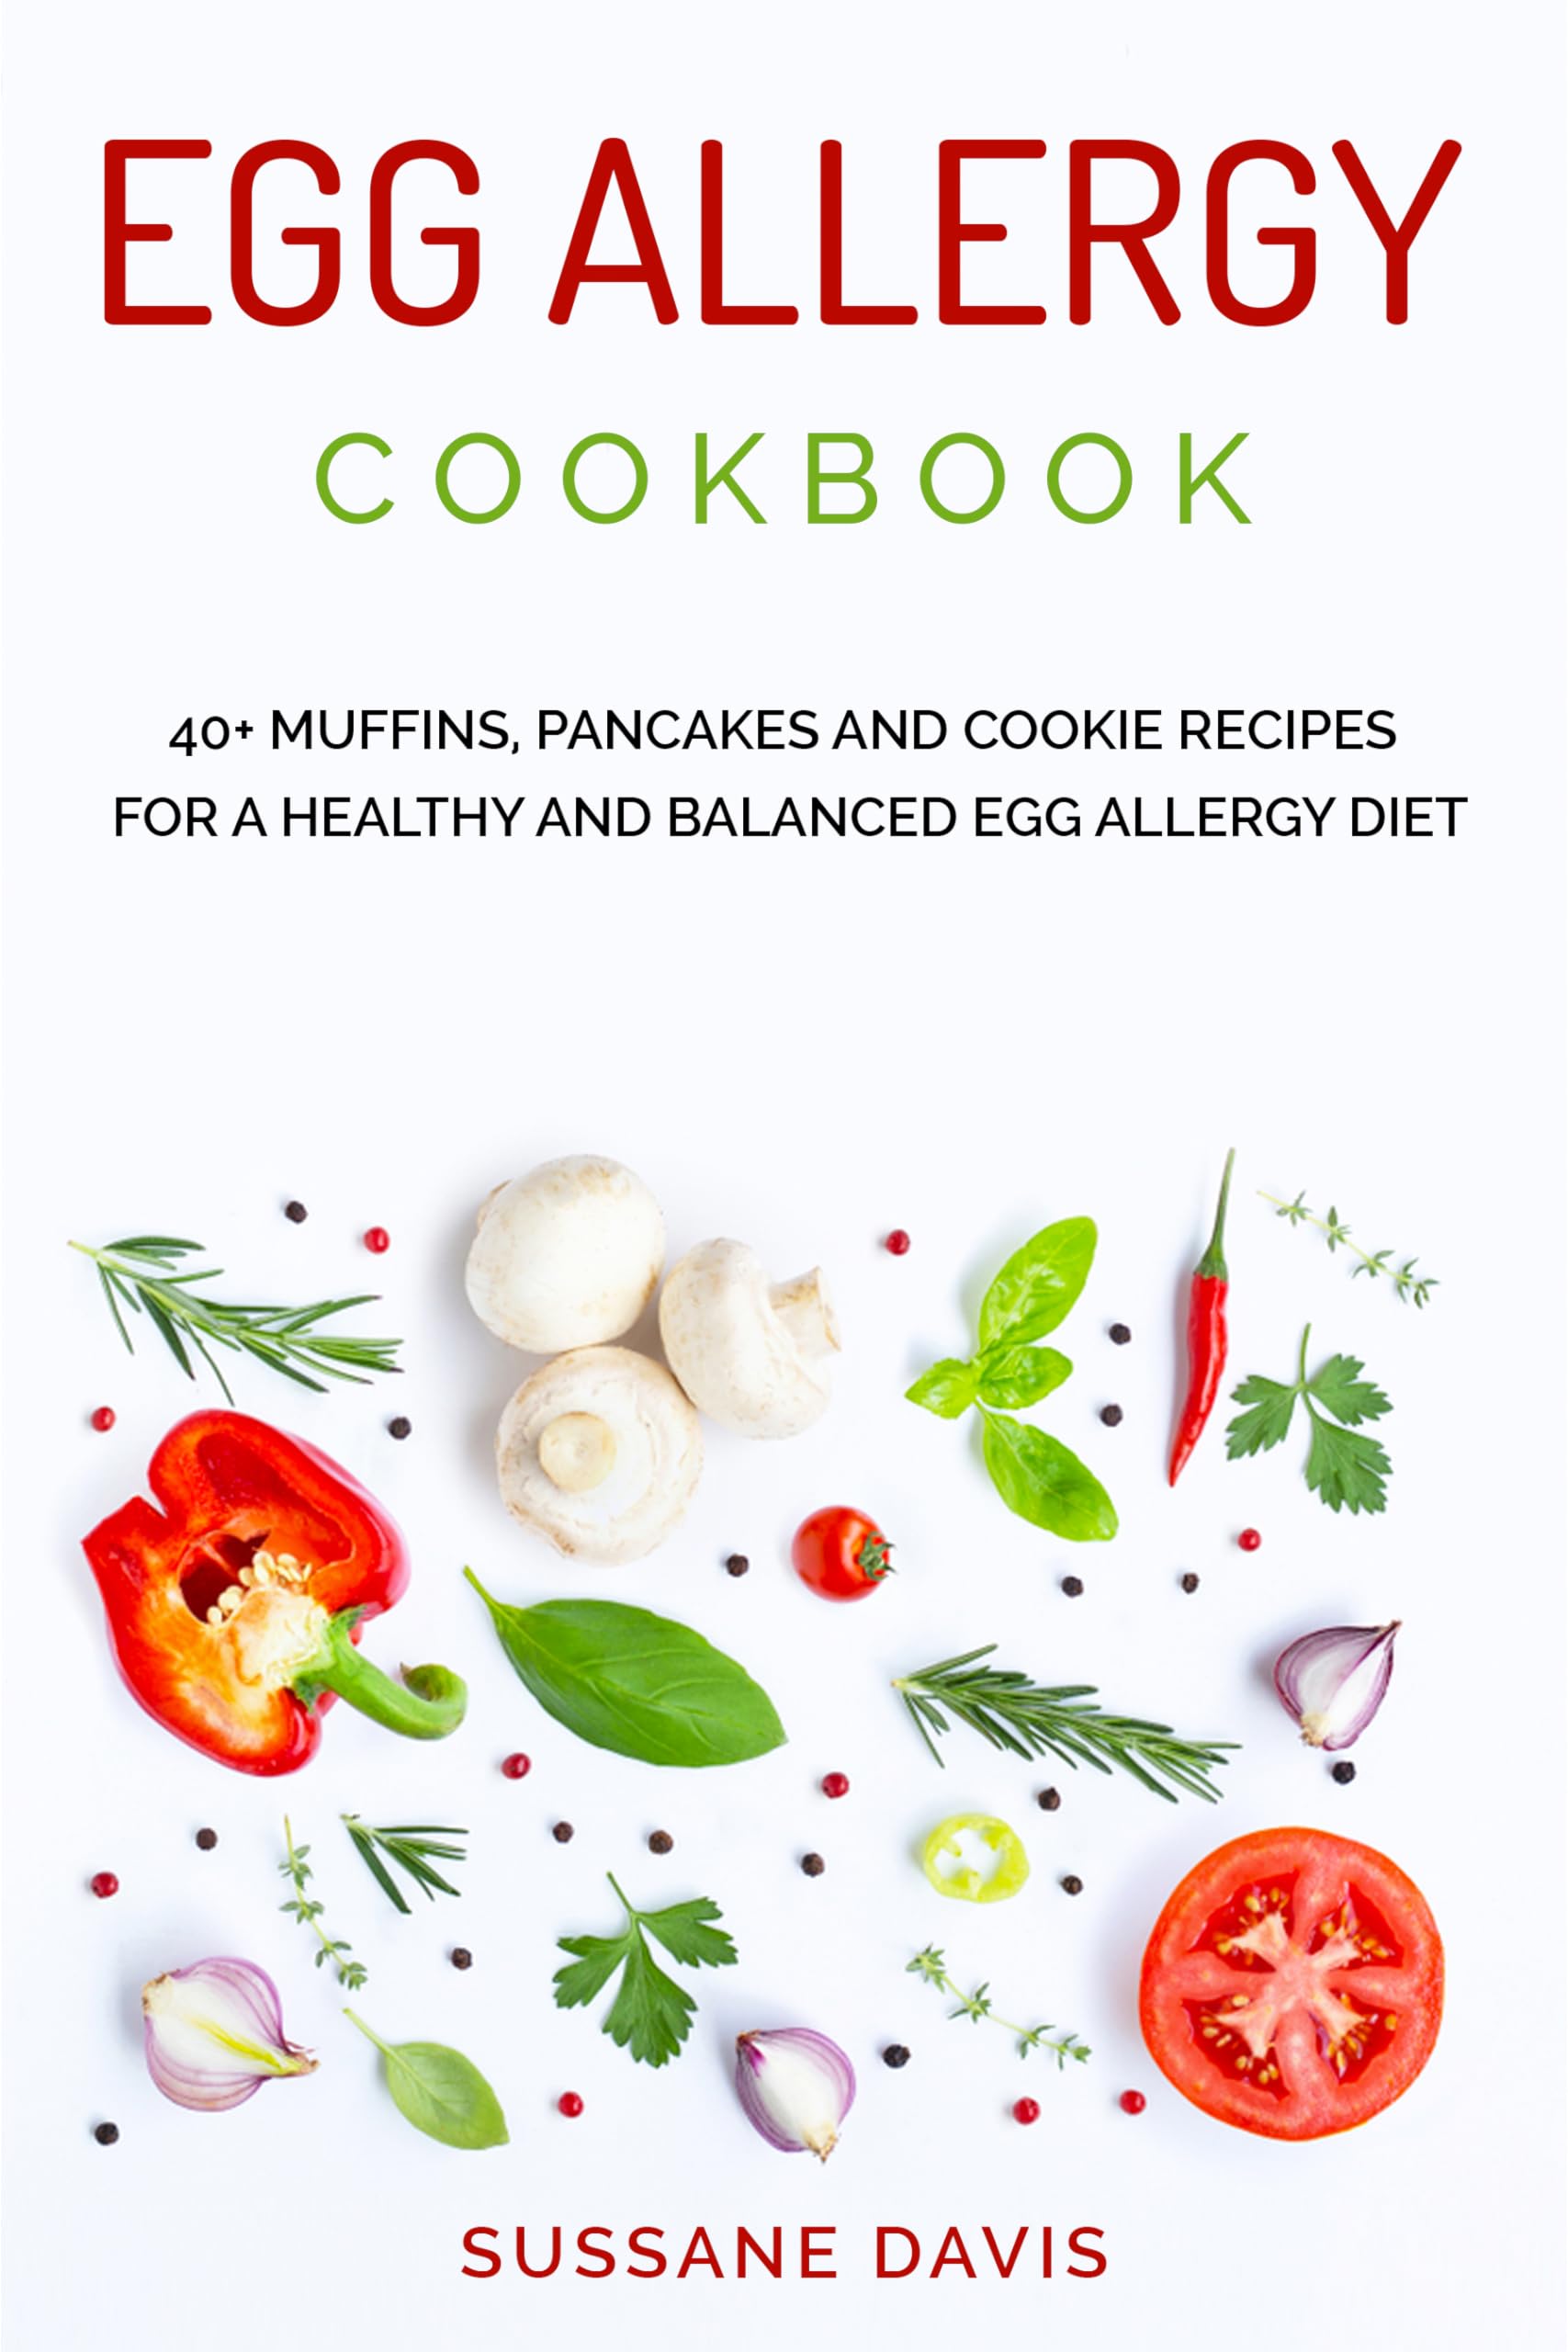 Egg Allergy Cookbook: 40+ Muffins, Pancakes and Cookie recipes for a healthy and balanced Egg Allergy Diet